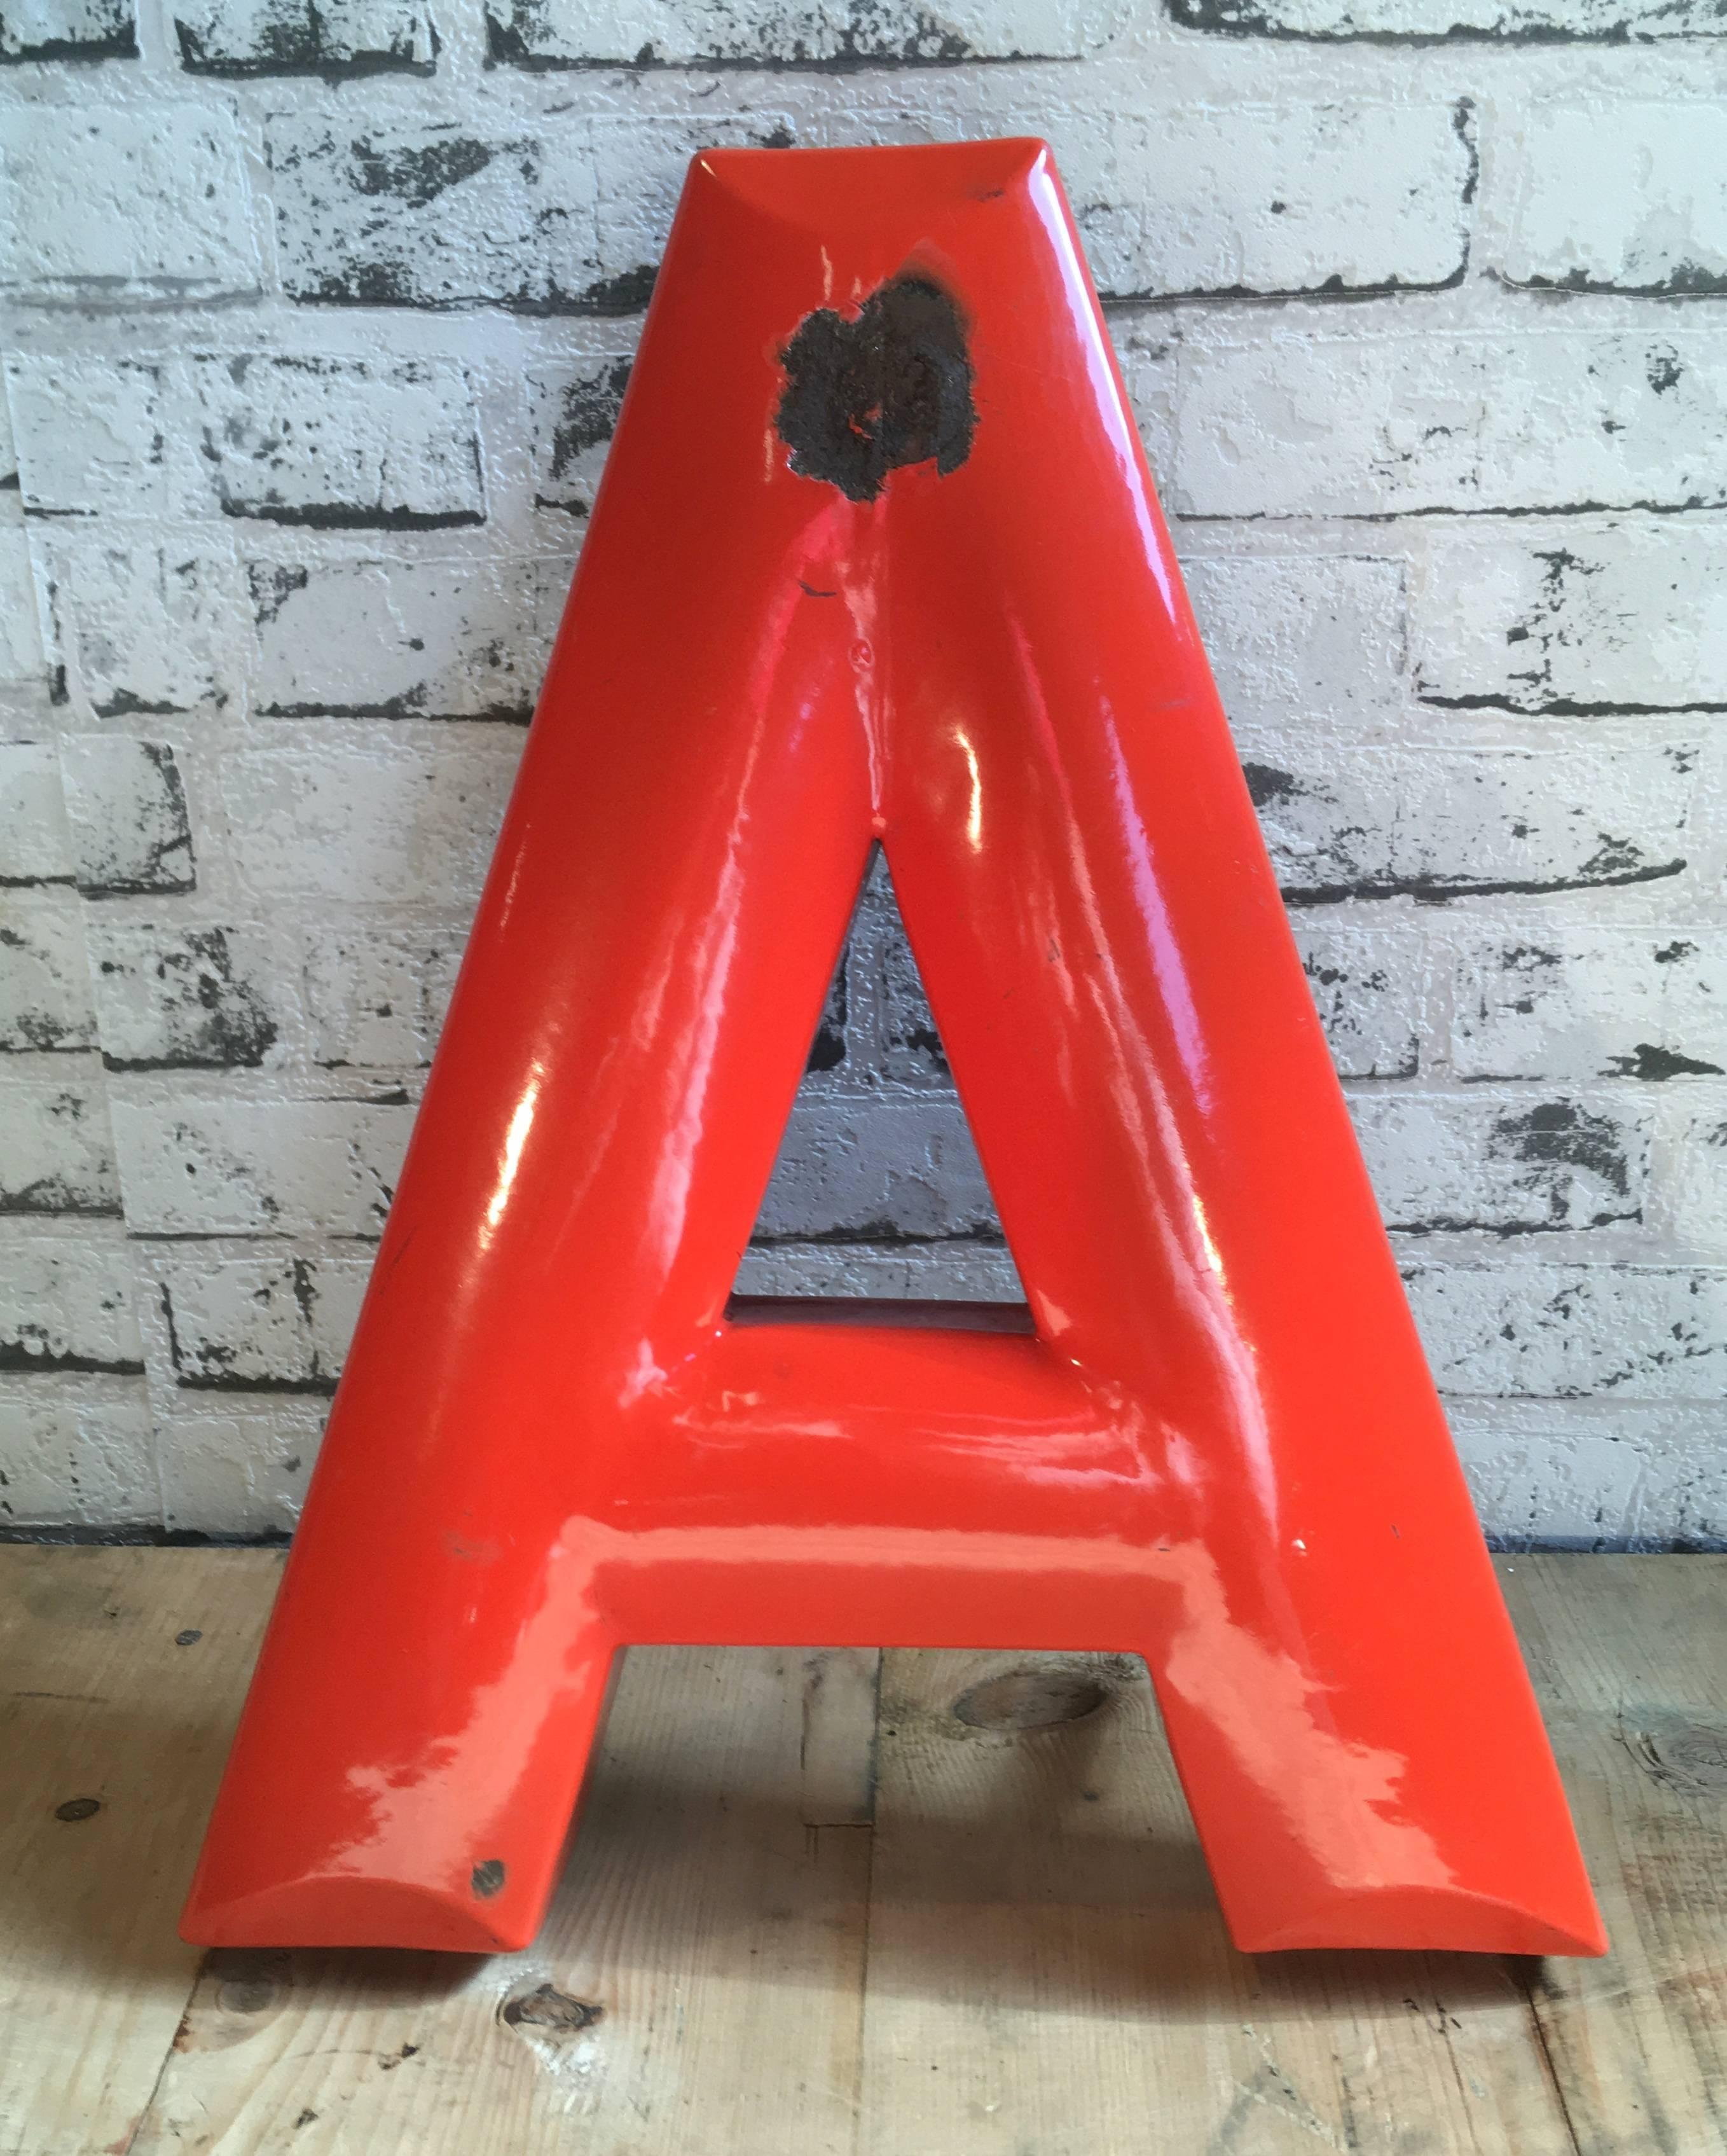 This industrial vintage letter 'A' was manufactured in former Czechoslovakia, 1930s. Comes from an old advertisement.
Letter is made from enamelled iron.